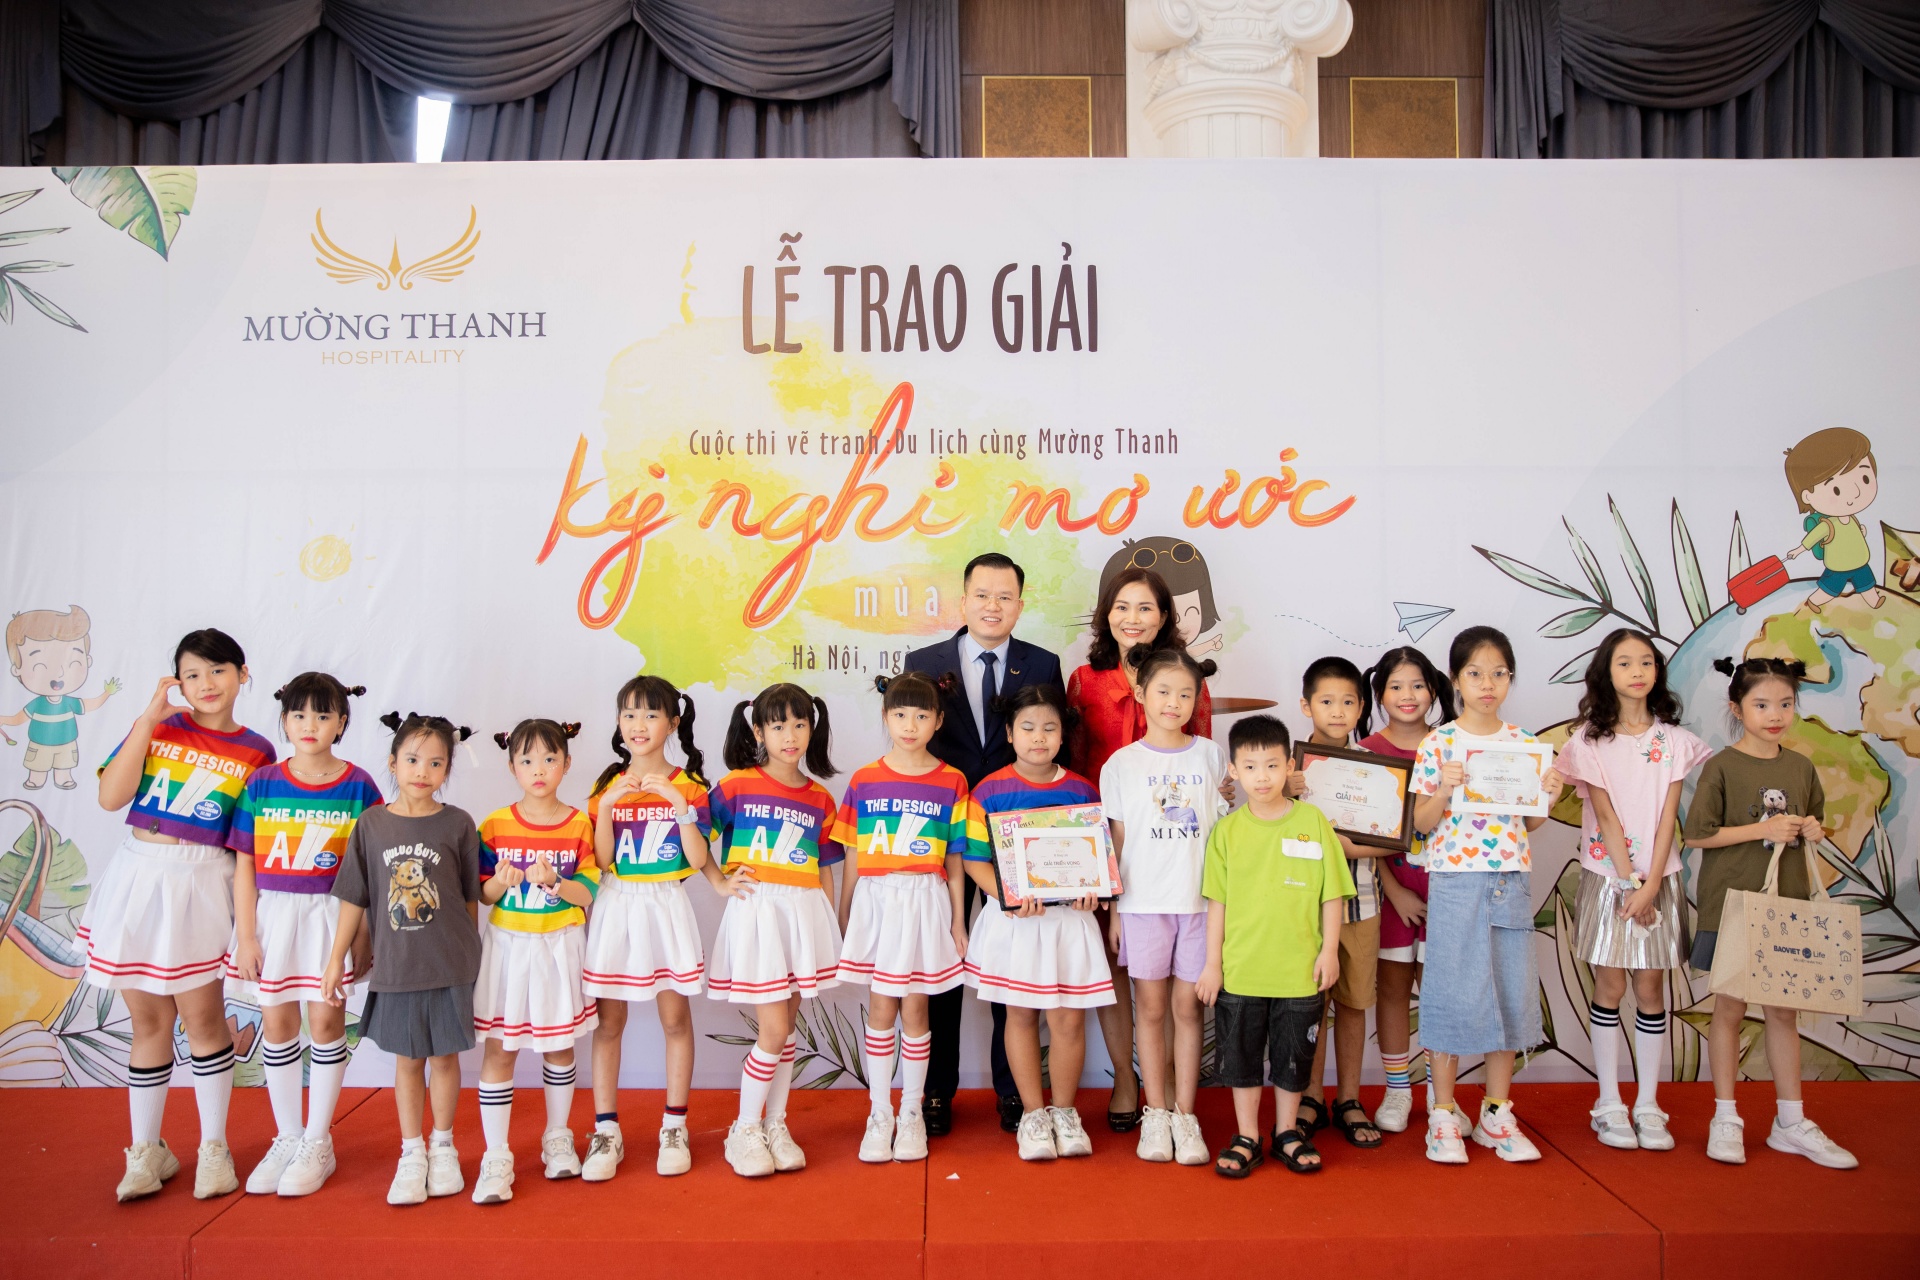 Launch of third “Travel with Muong Thanh - Dream vacation” drawing contest